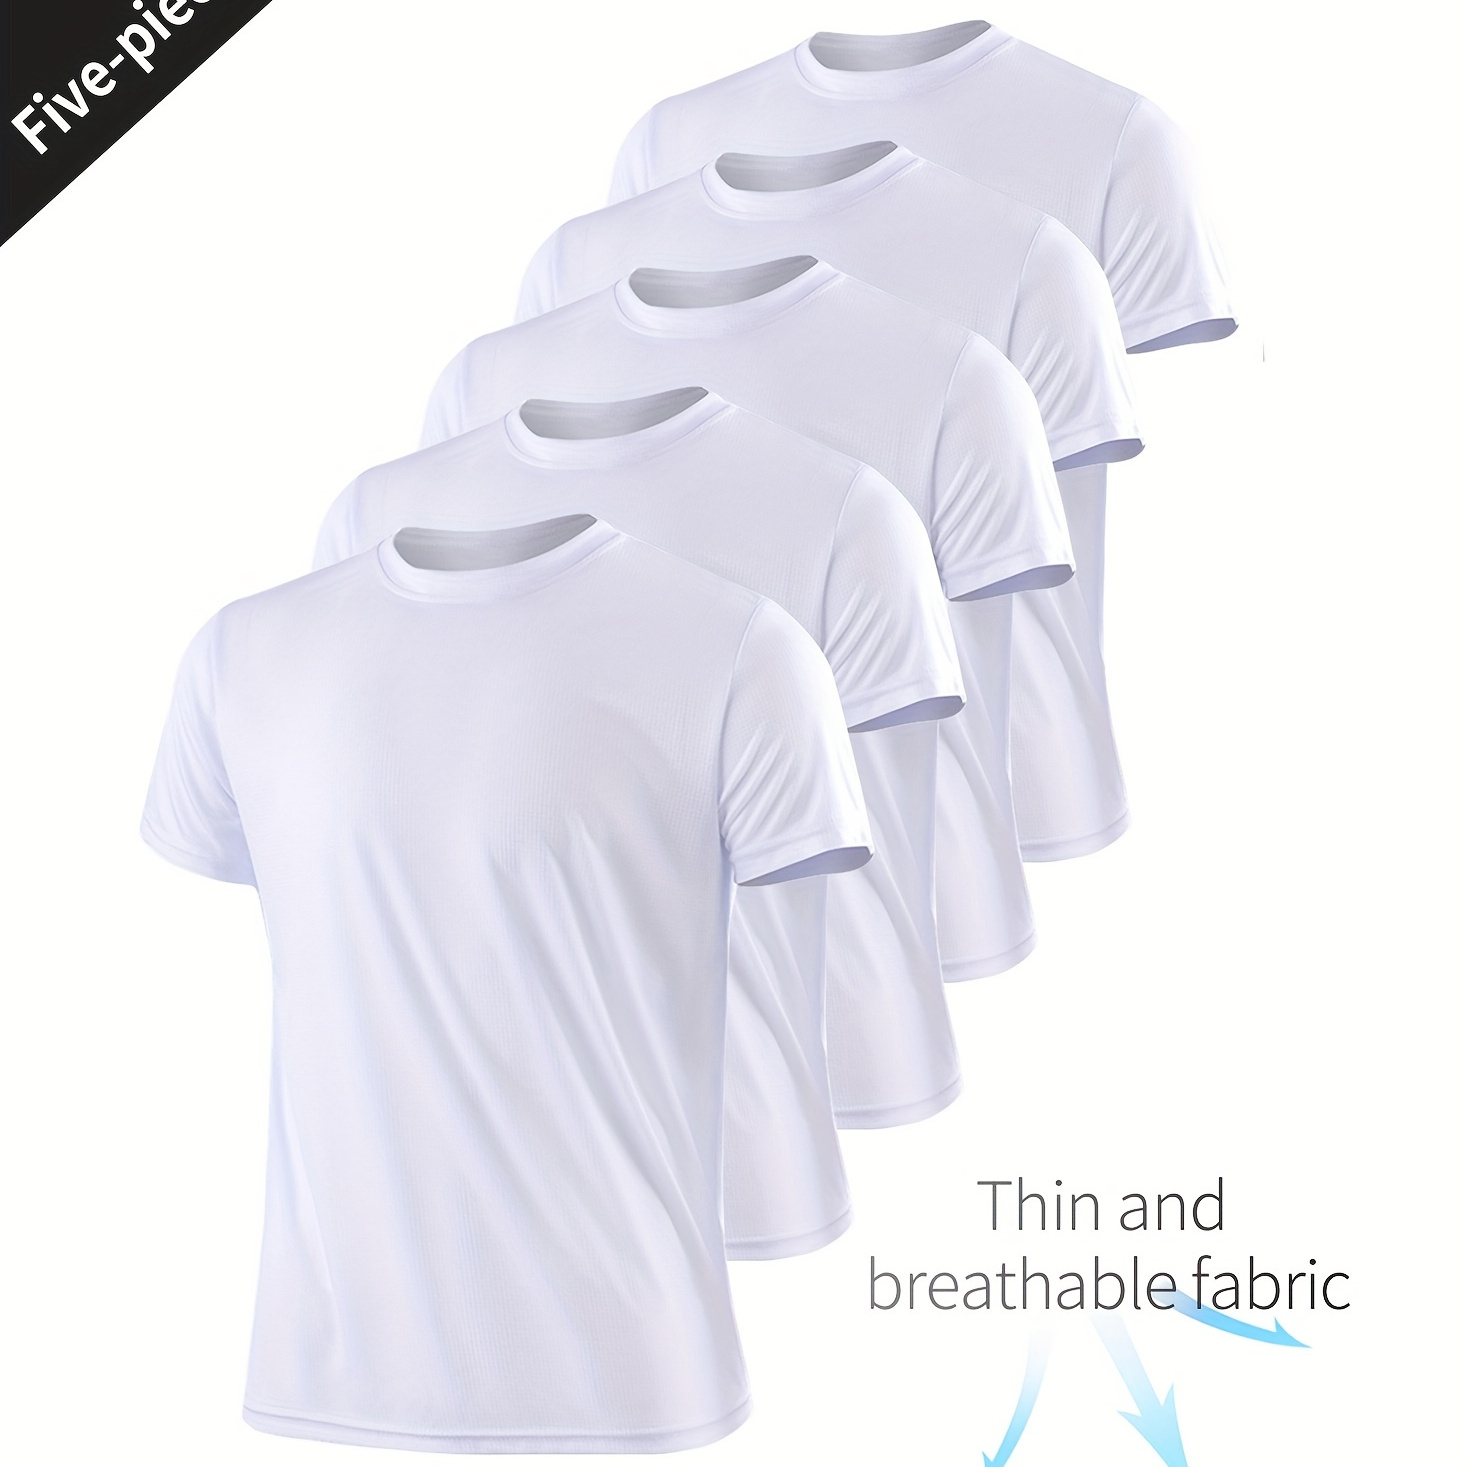 

5pcs Breathable Quick Dry Men's Ultra Thin Sports T-shirt For Fitness, Gym, And Running - Lightweight And Comfortable